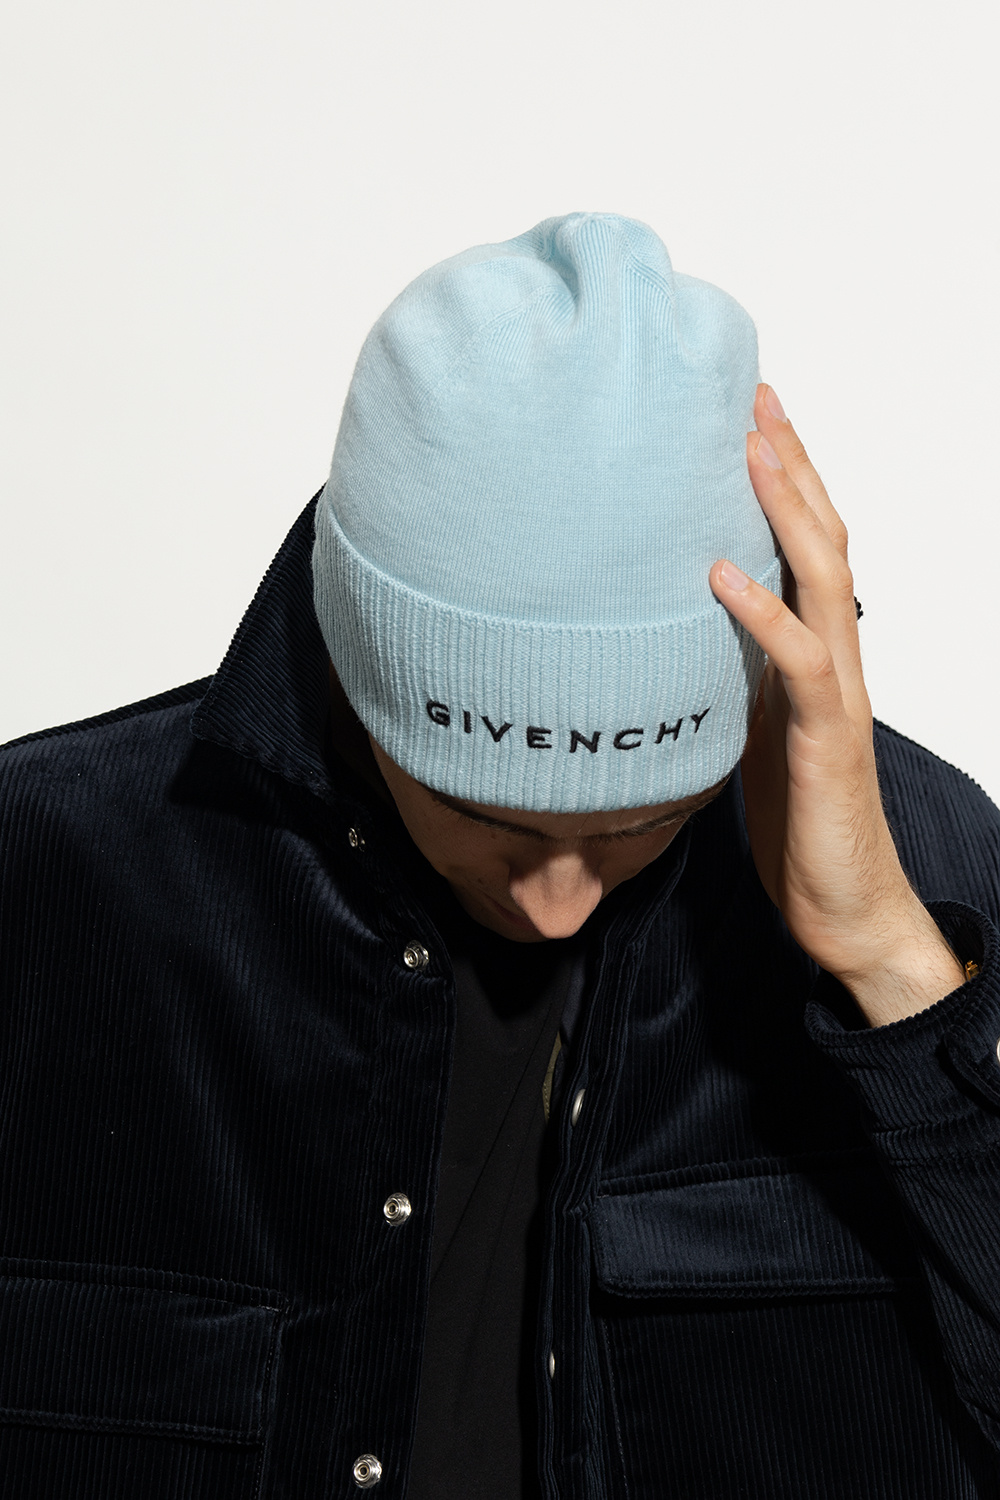 givenchy T-shirts Wool beanie with logo